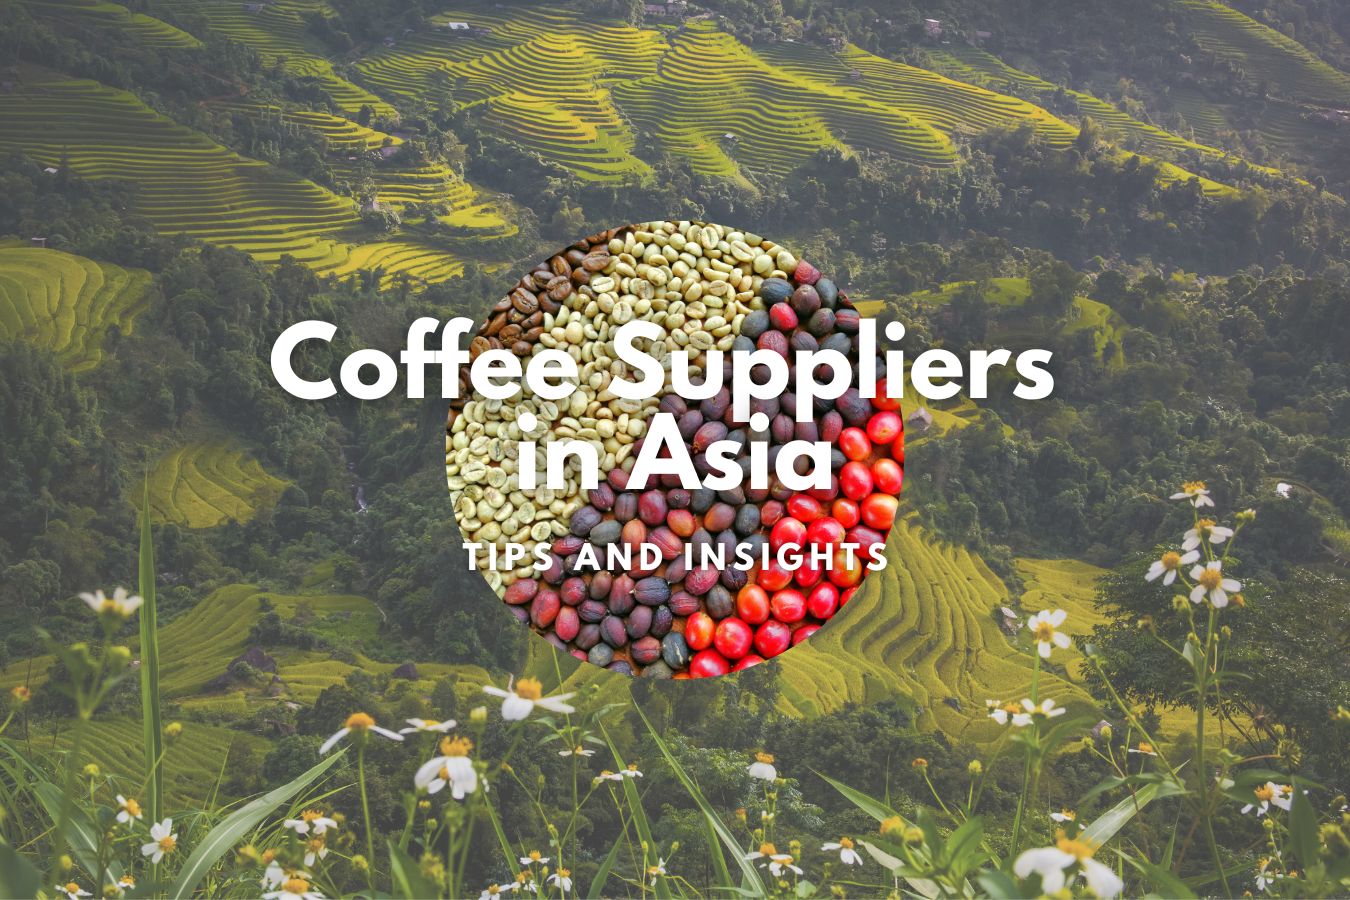 Finding the Best Coffee Suppliers in Asia: Tips and Insights